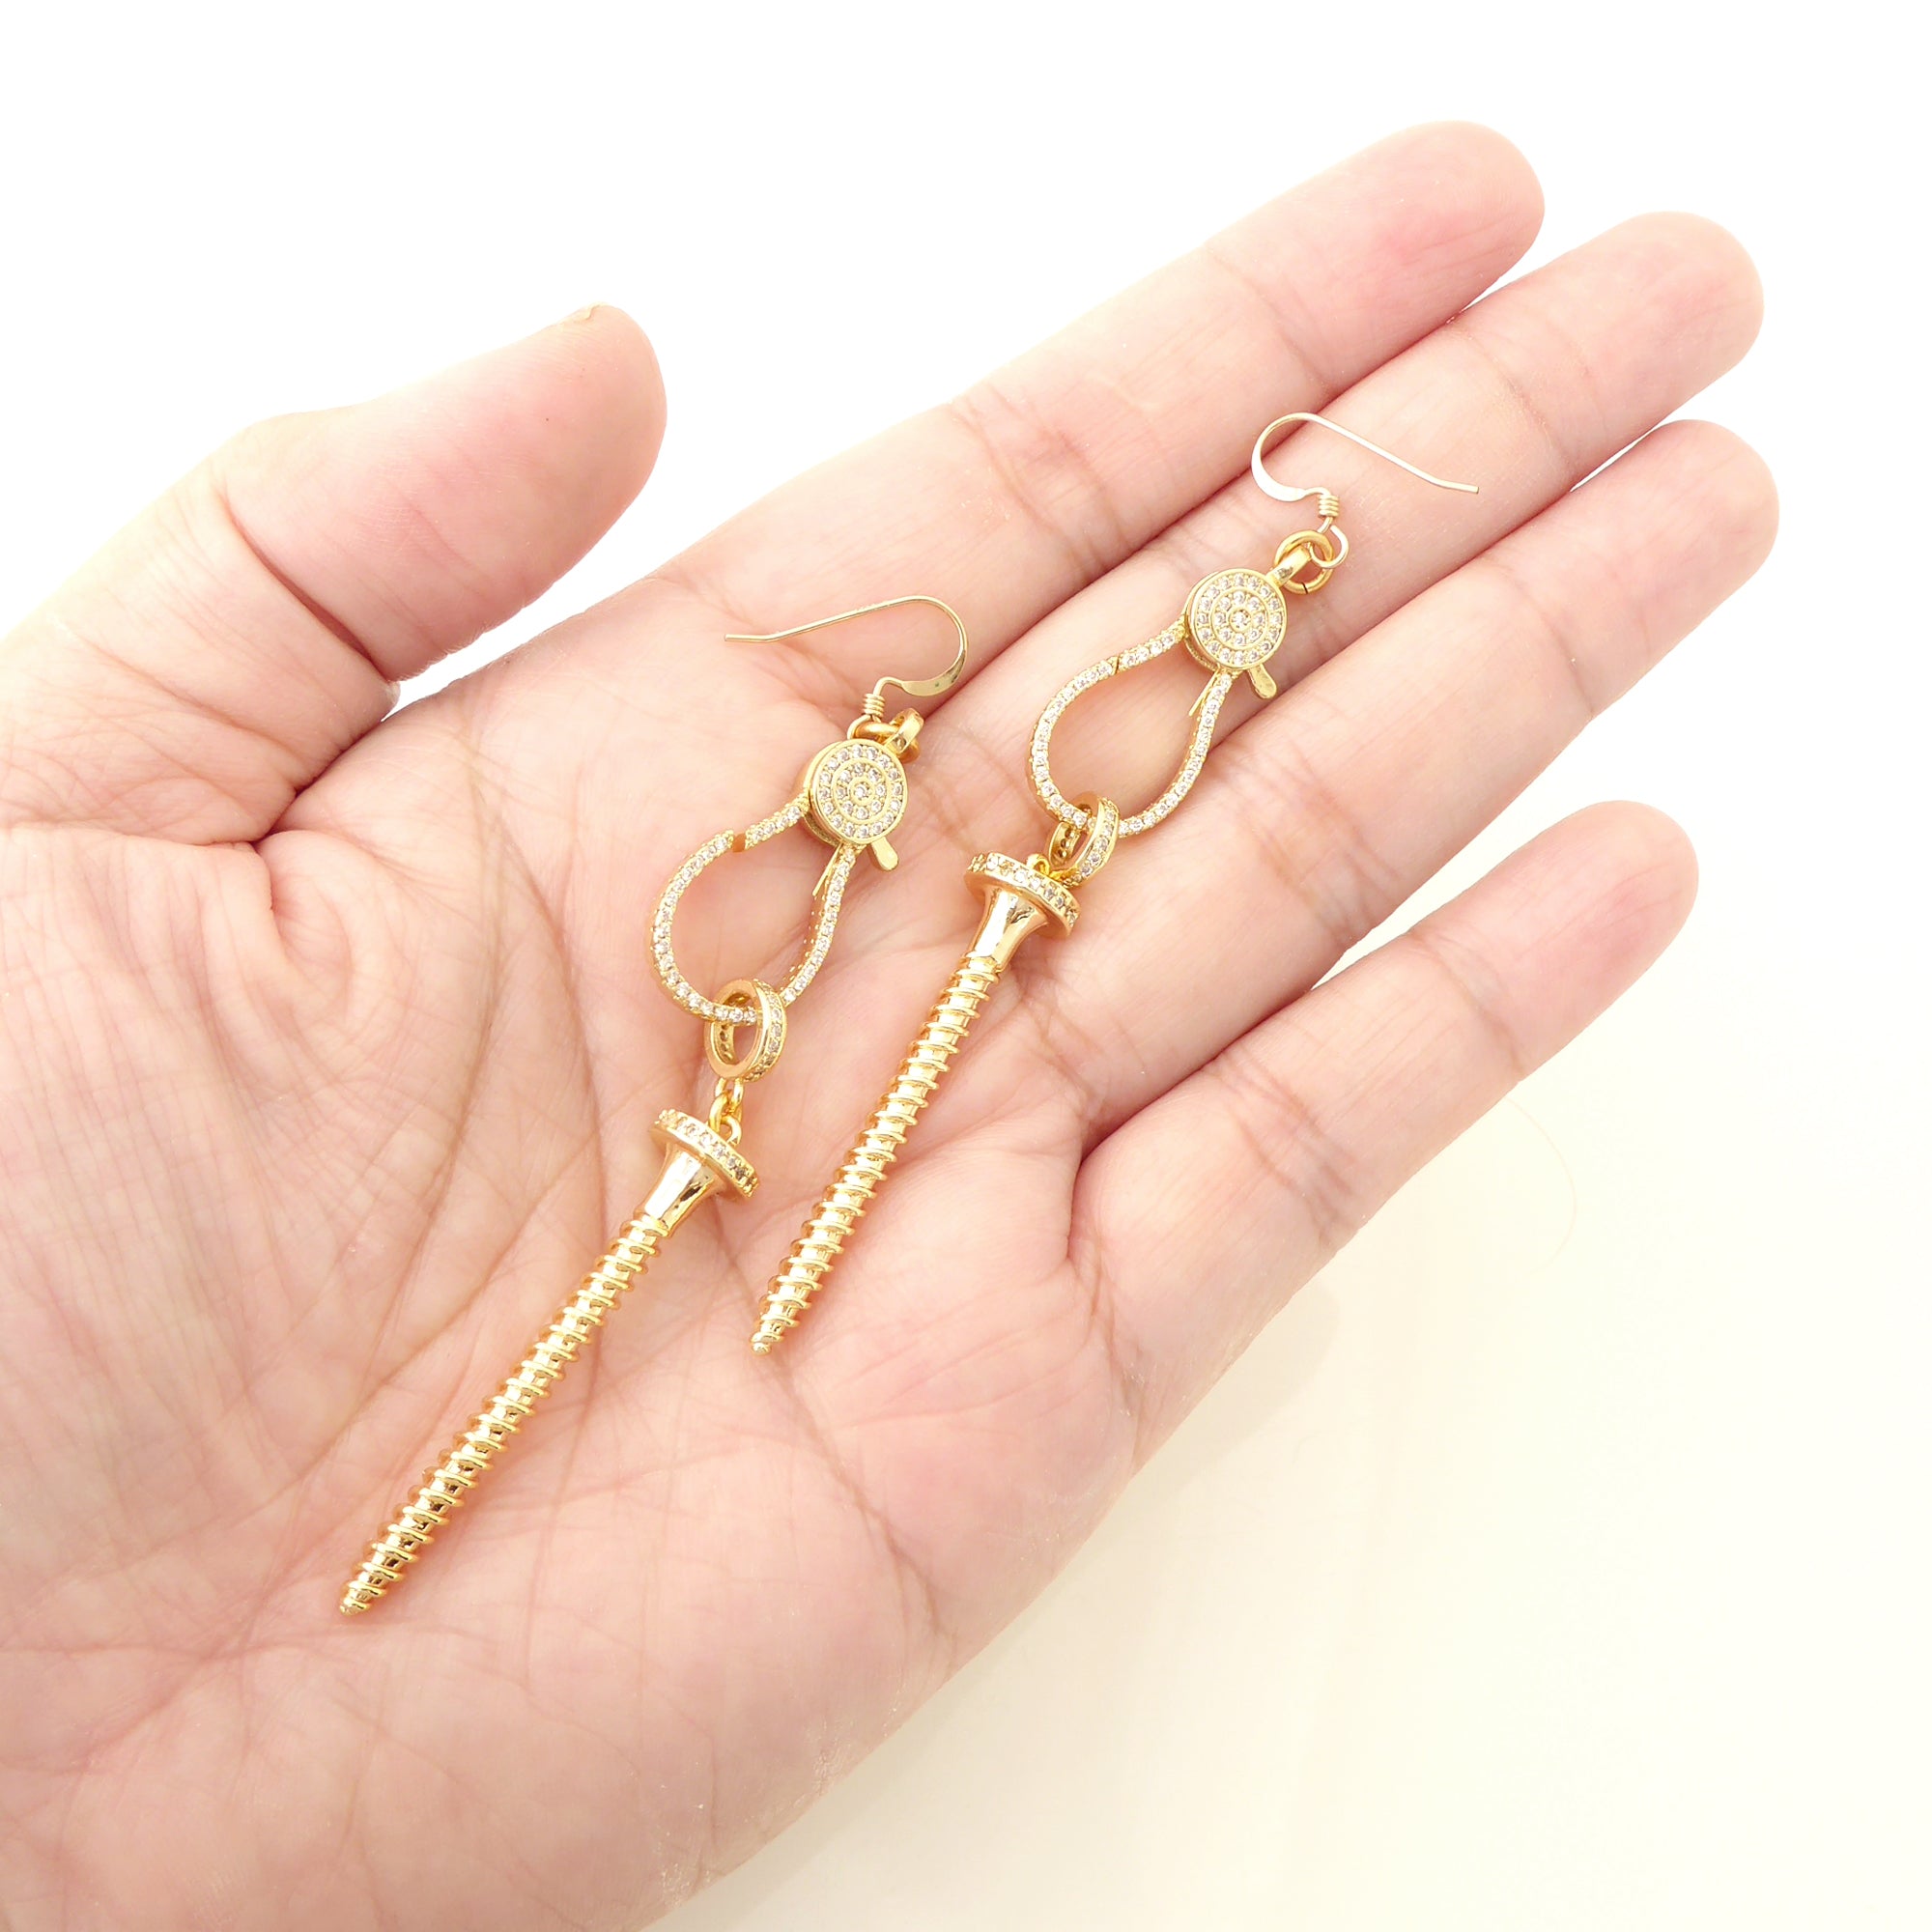 Gold pave rhinestone screw earrings by Jenny Dayco 4